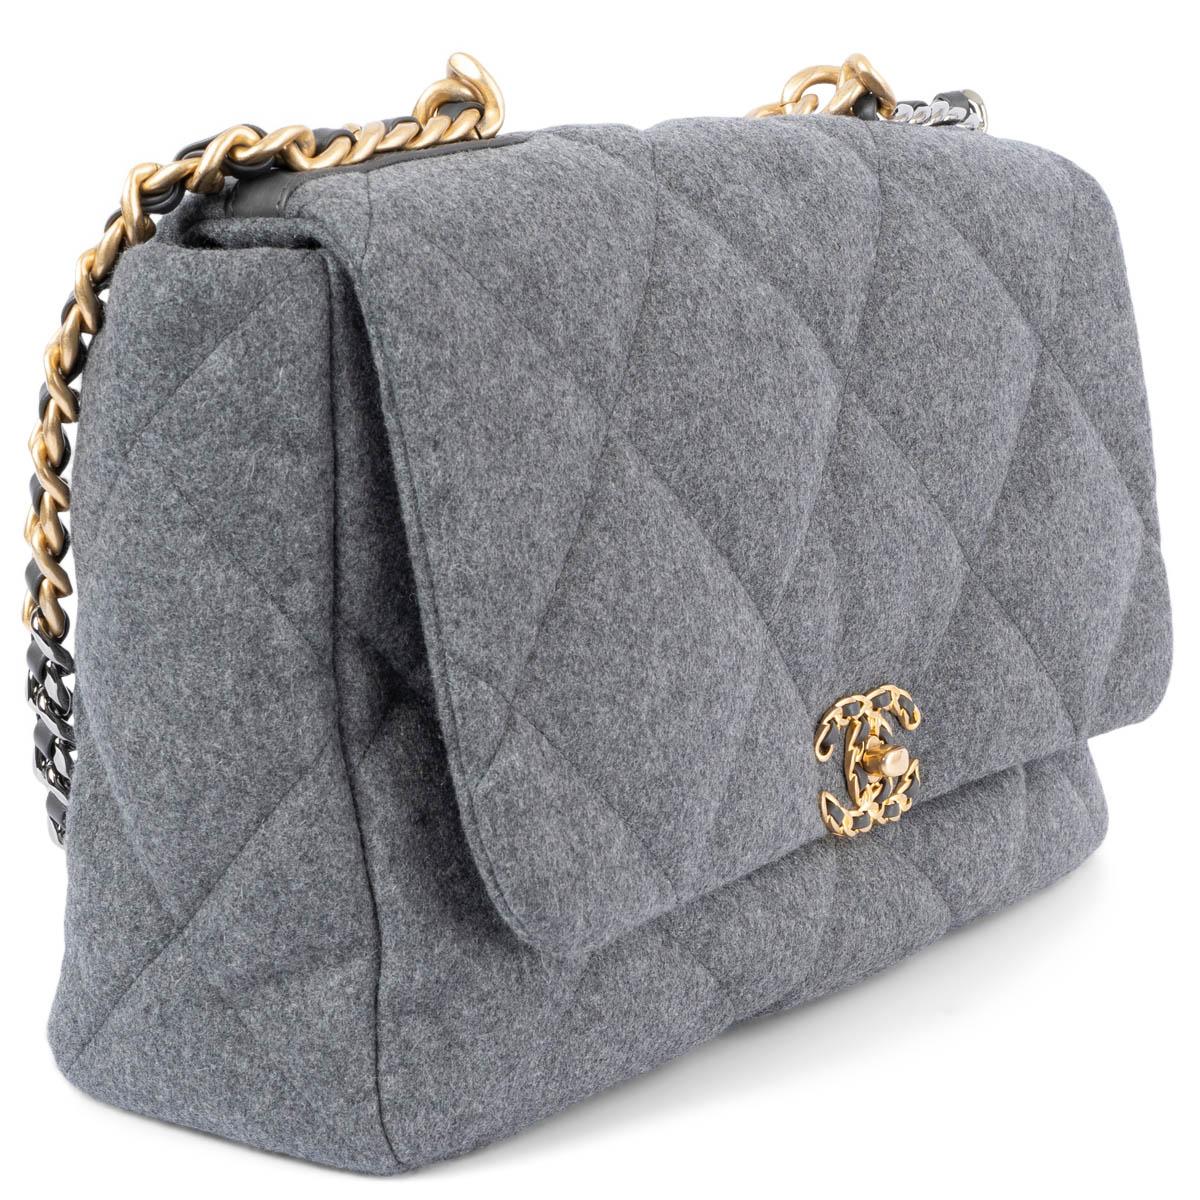 100% authentic Chanel 19 Maxi Bag in grey wool featuring dark silver-tone, gold-tone and gunmetal hardware. The design comes with a chunky chainlink top-handle and shoulder-strap. Opens with a CC turn-lock to a grey grosgrain lined interior with one